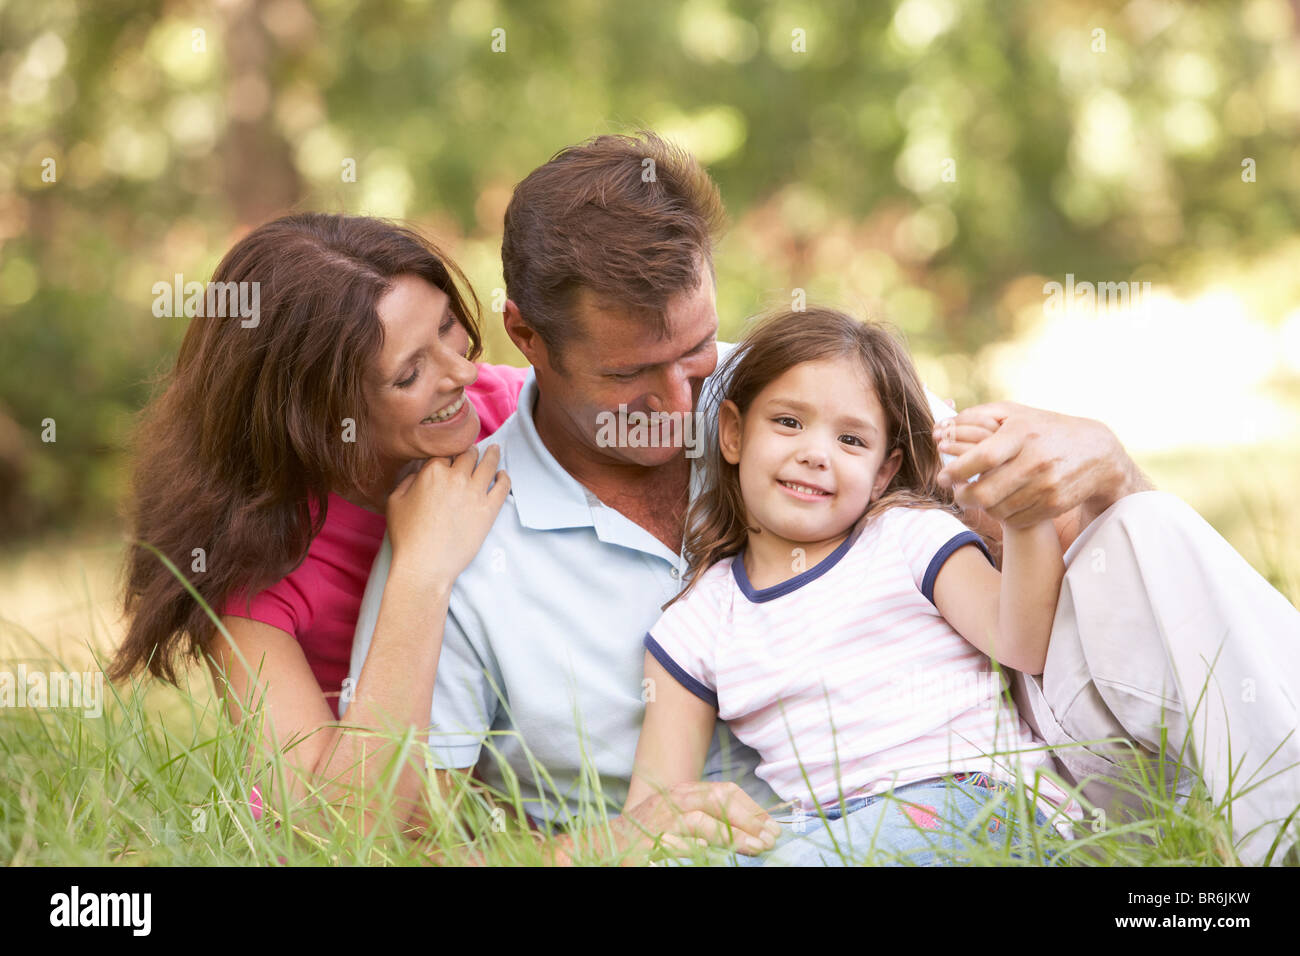 Family Sitting In Long Grass In Park Stock Photo